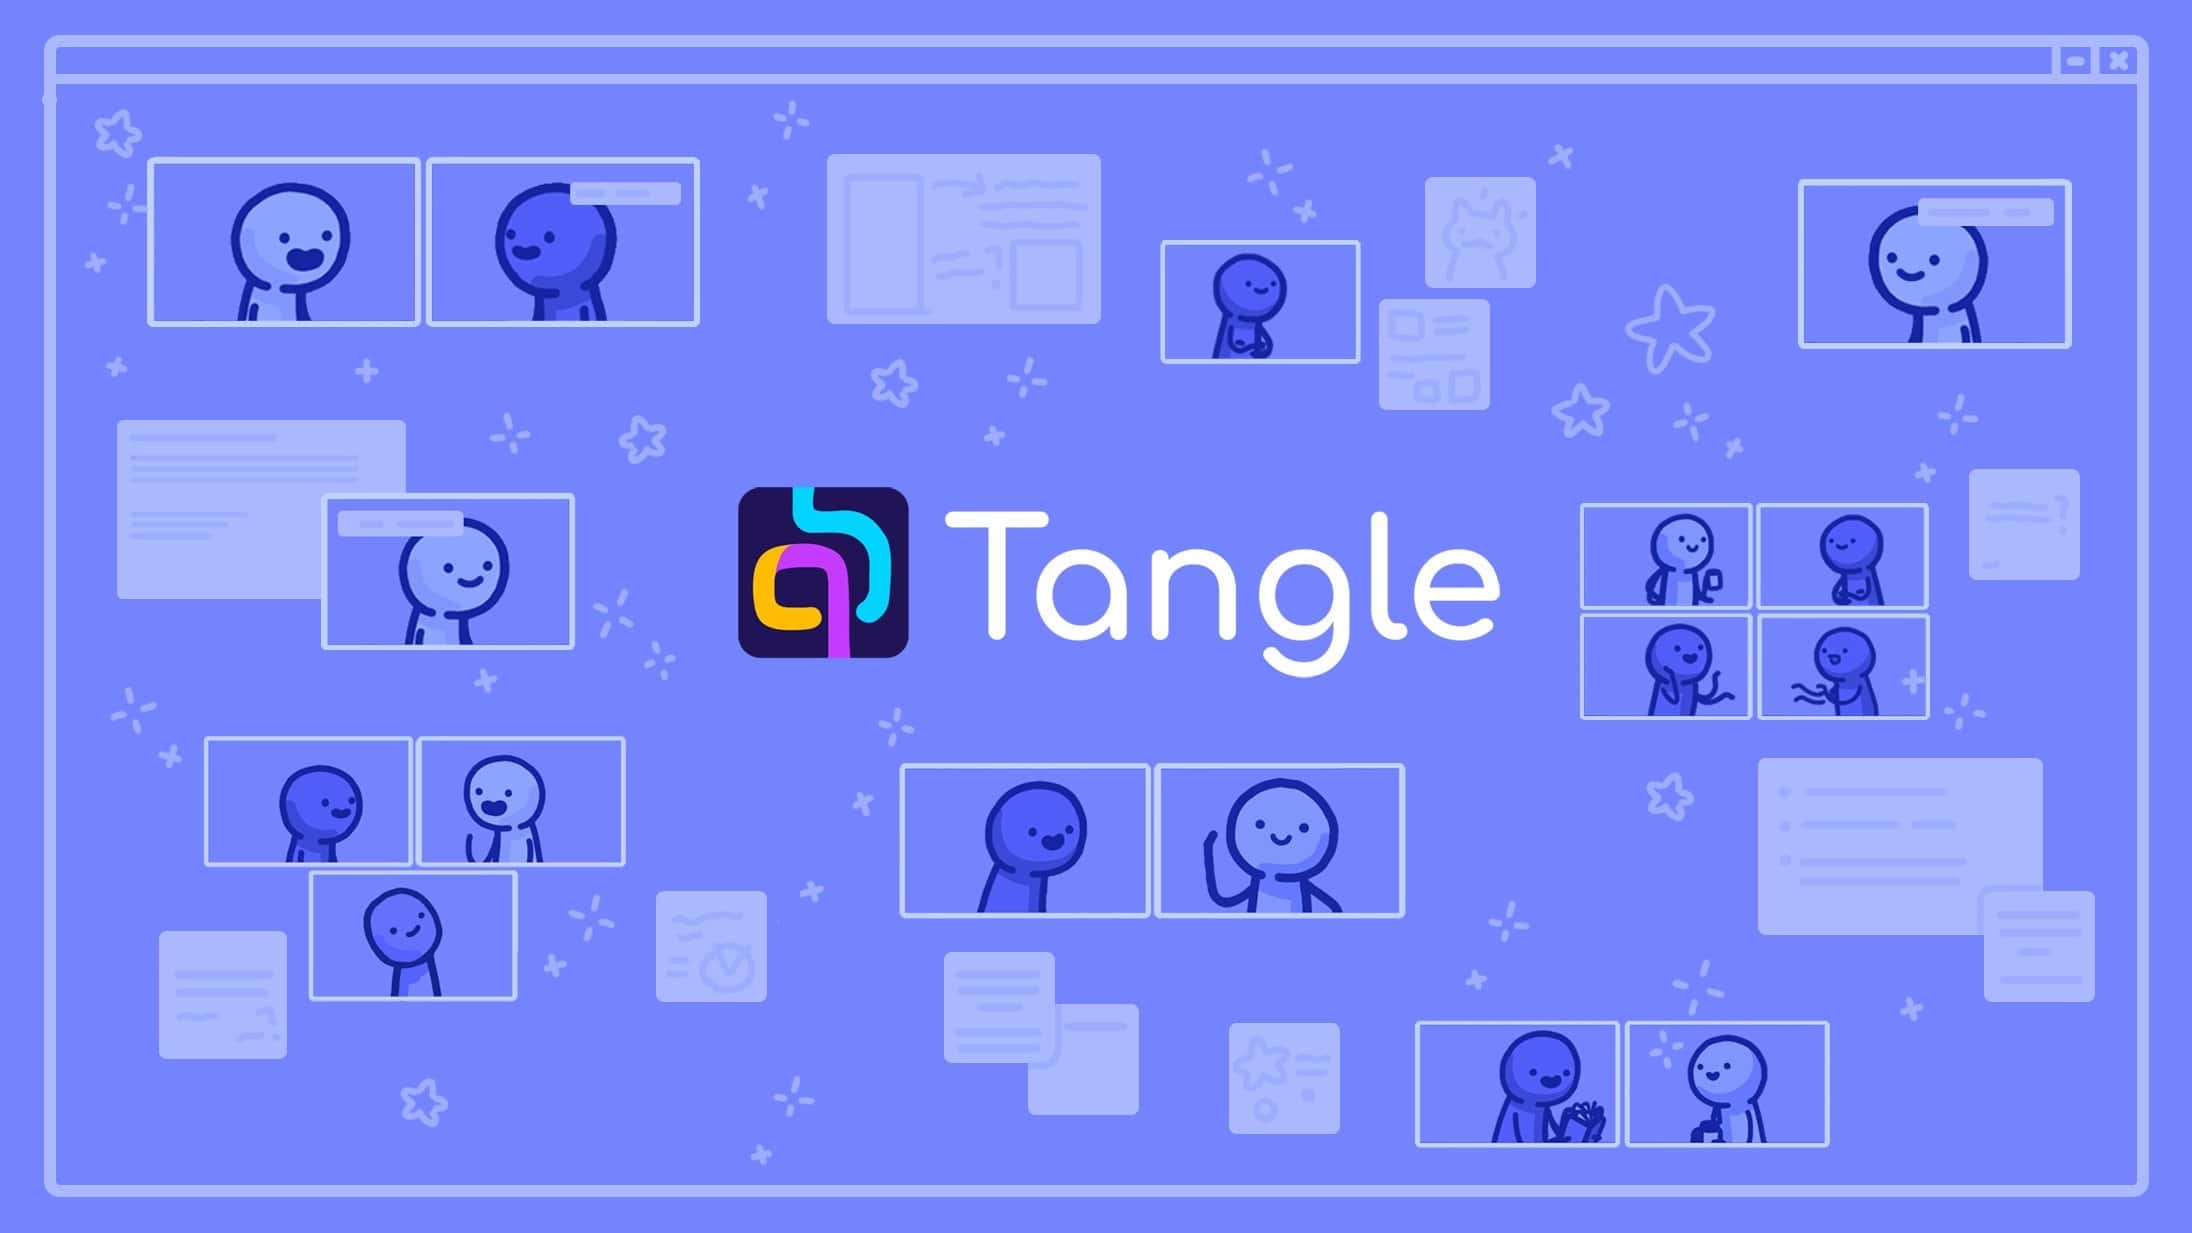 Tangle: A new video conferencing app created by game developers to challenge Zoom and Teams